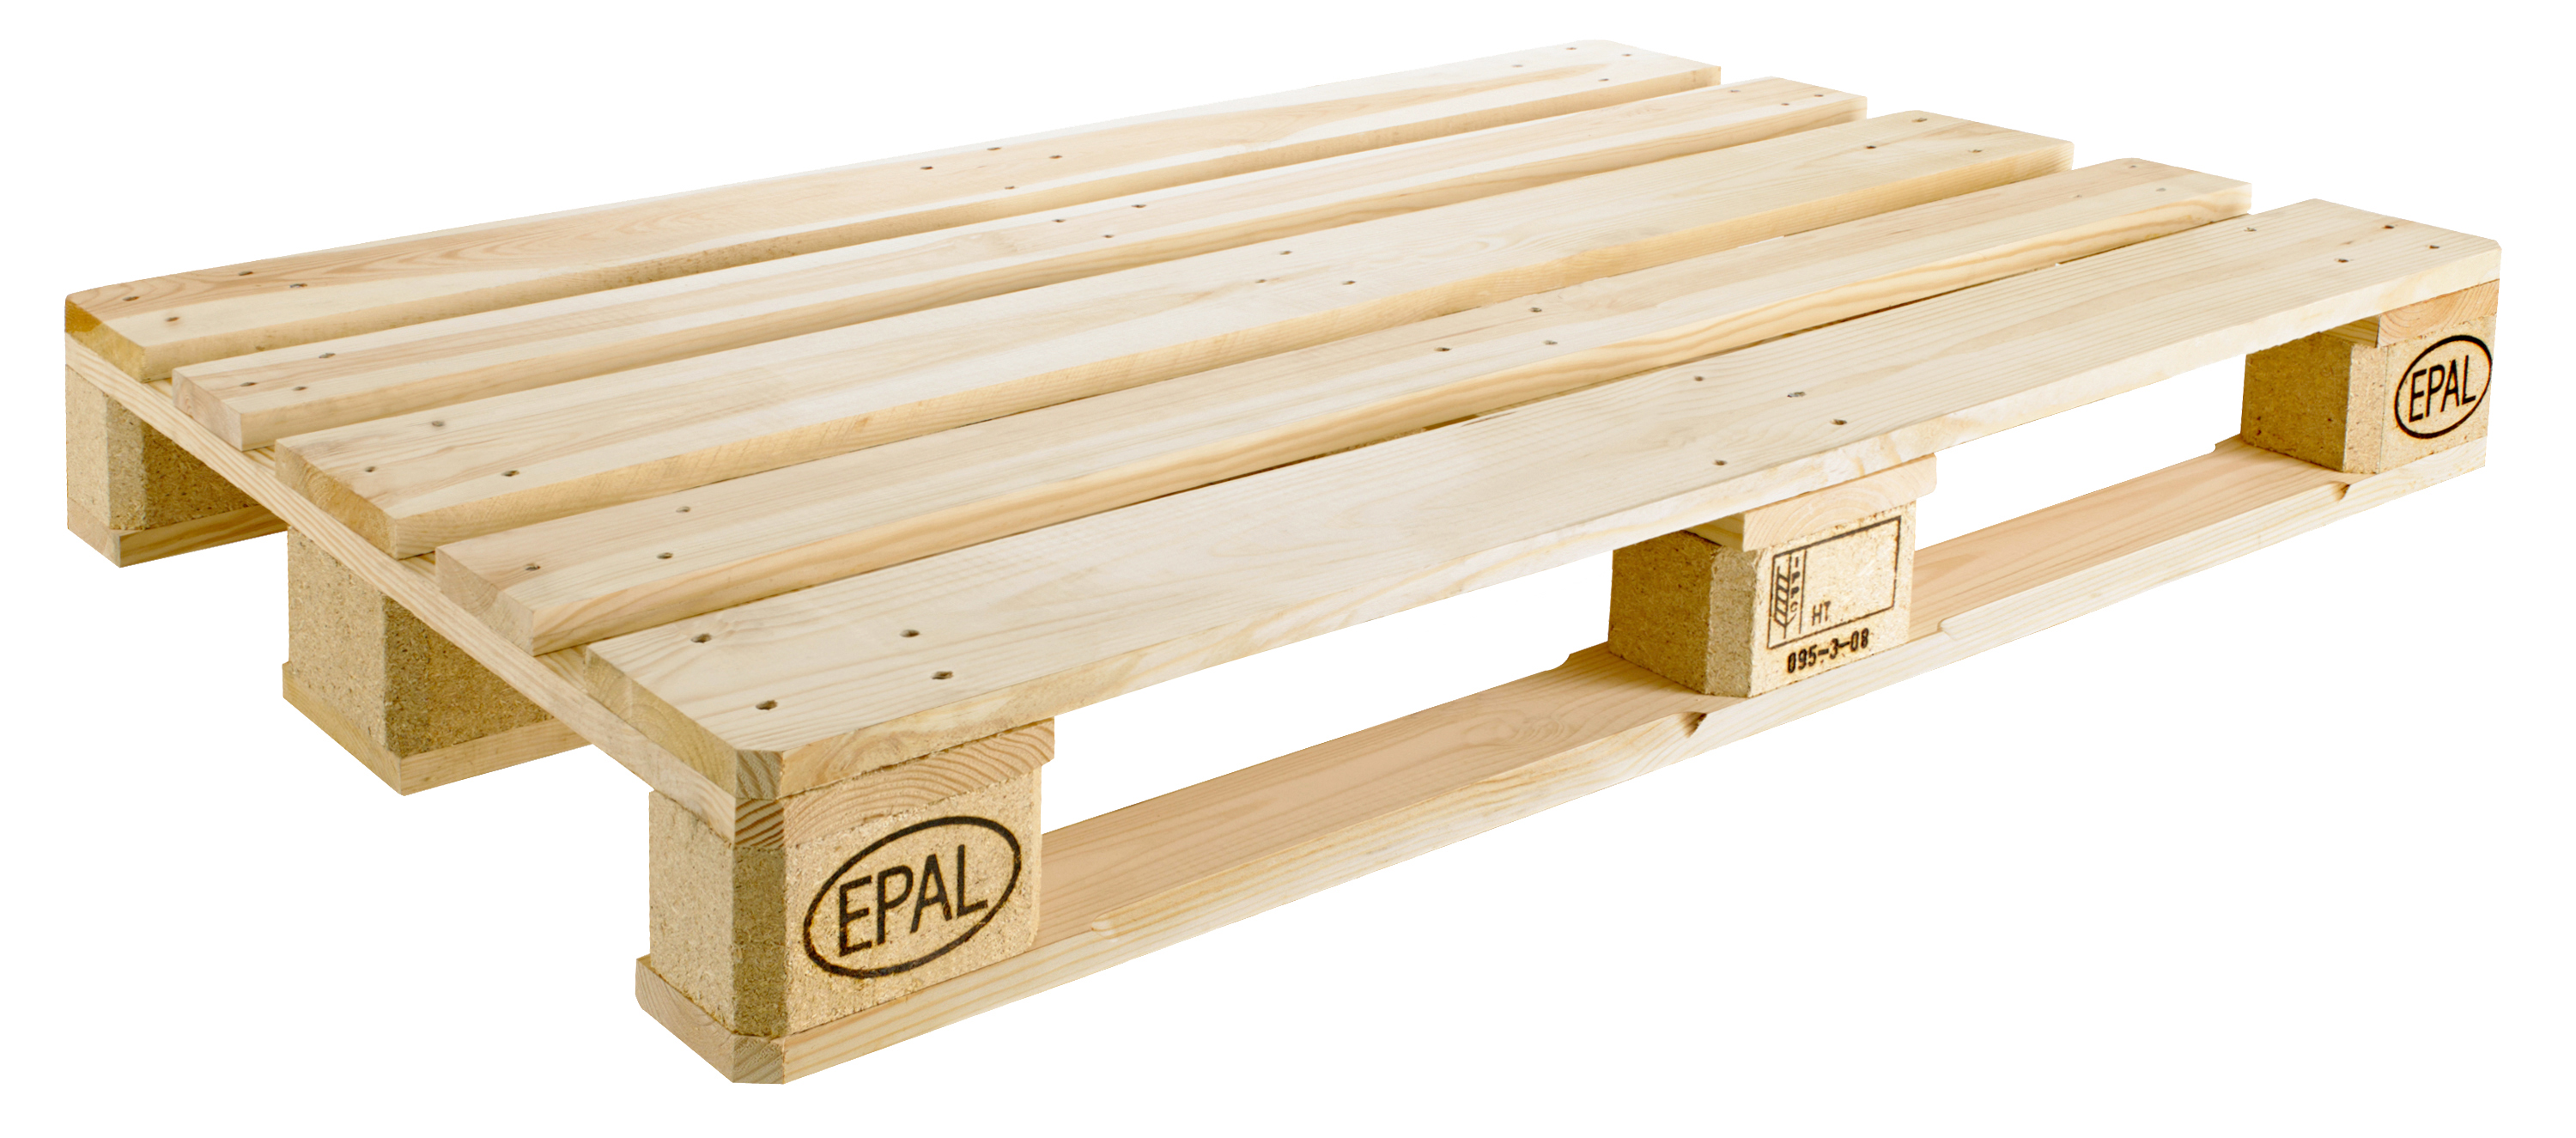 Euro pallets used for making garden furniture